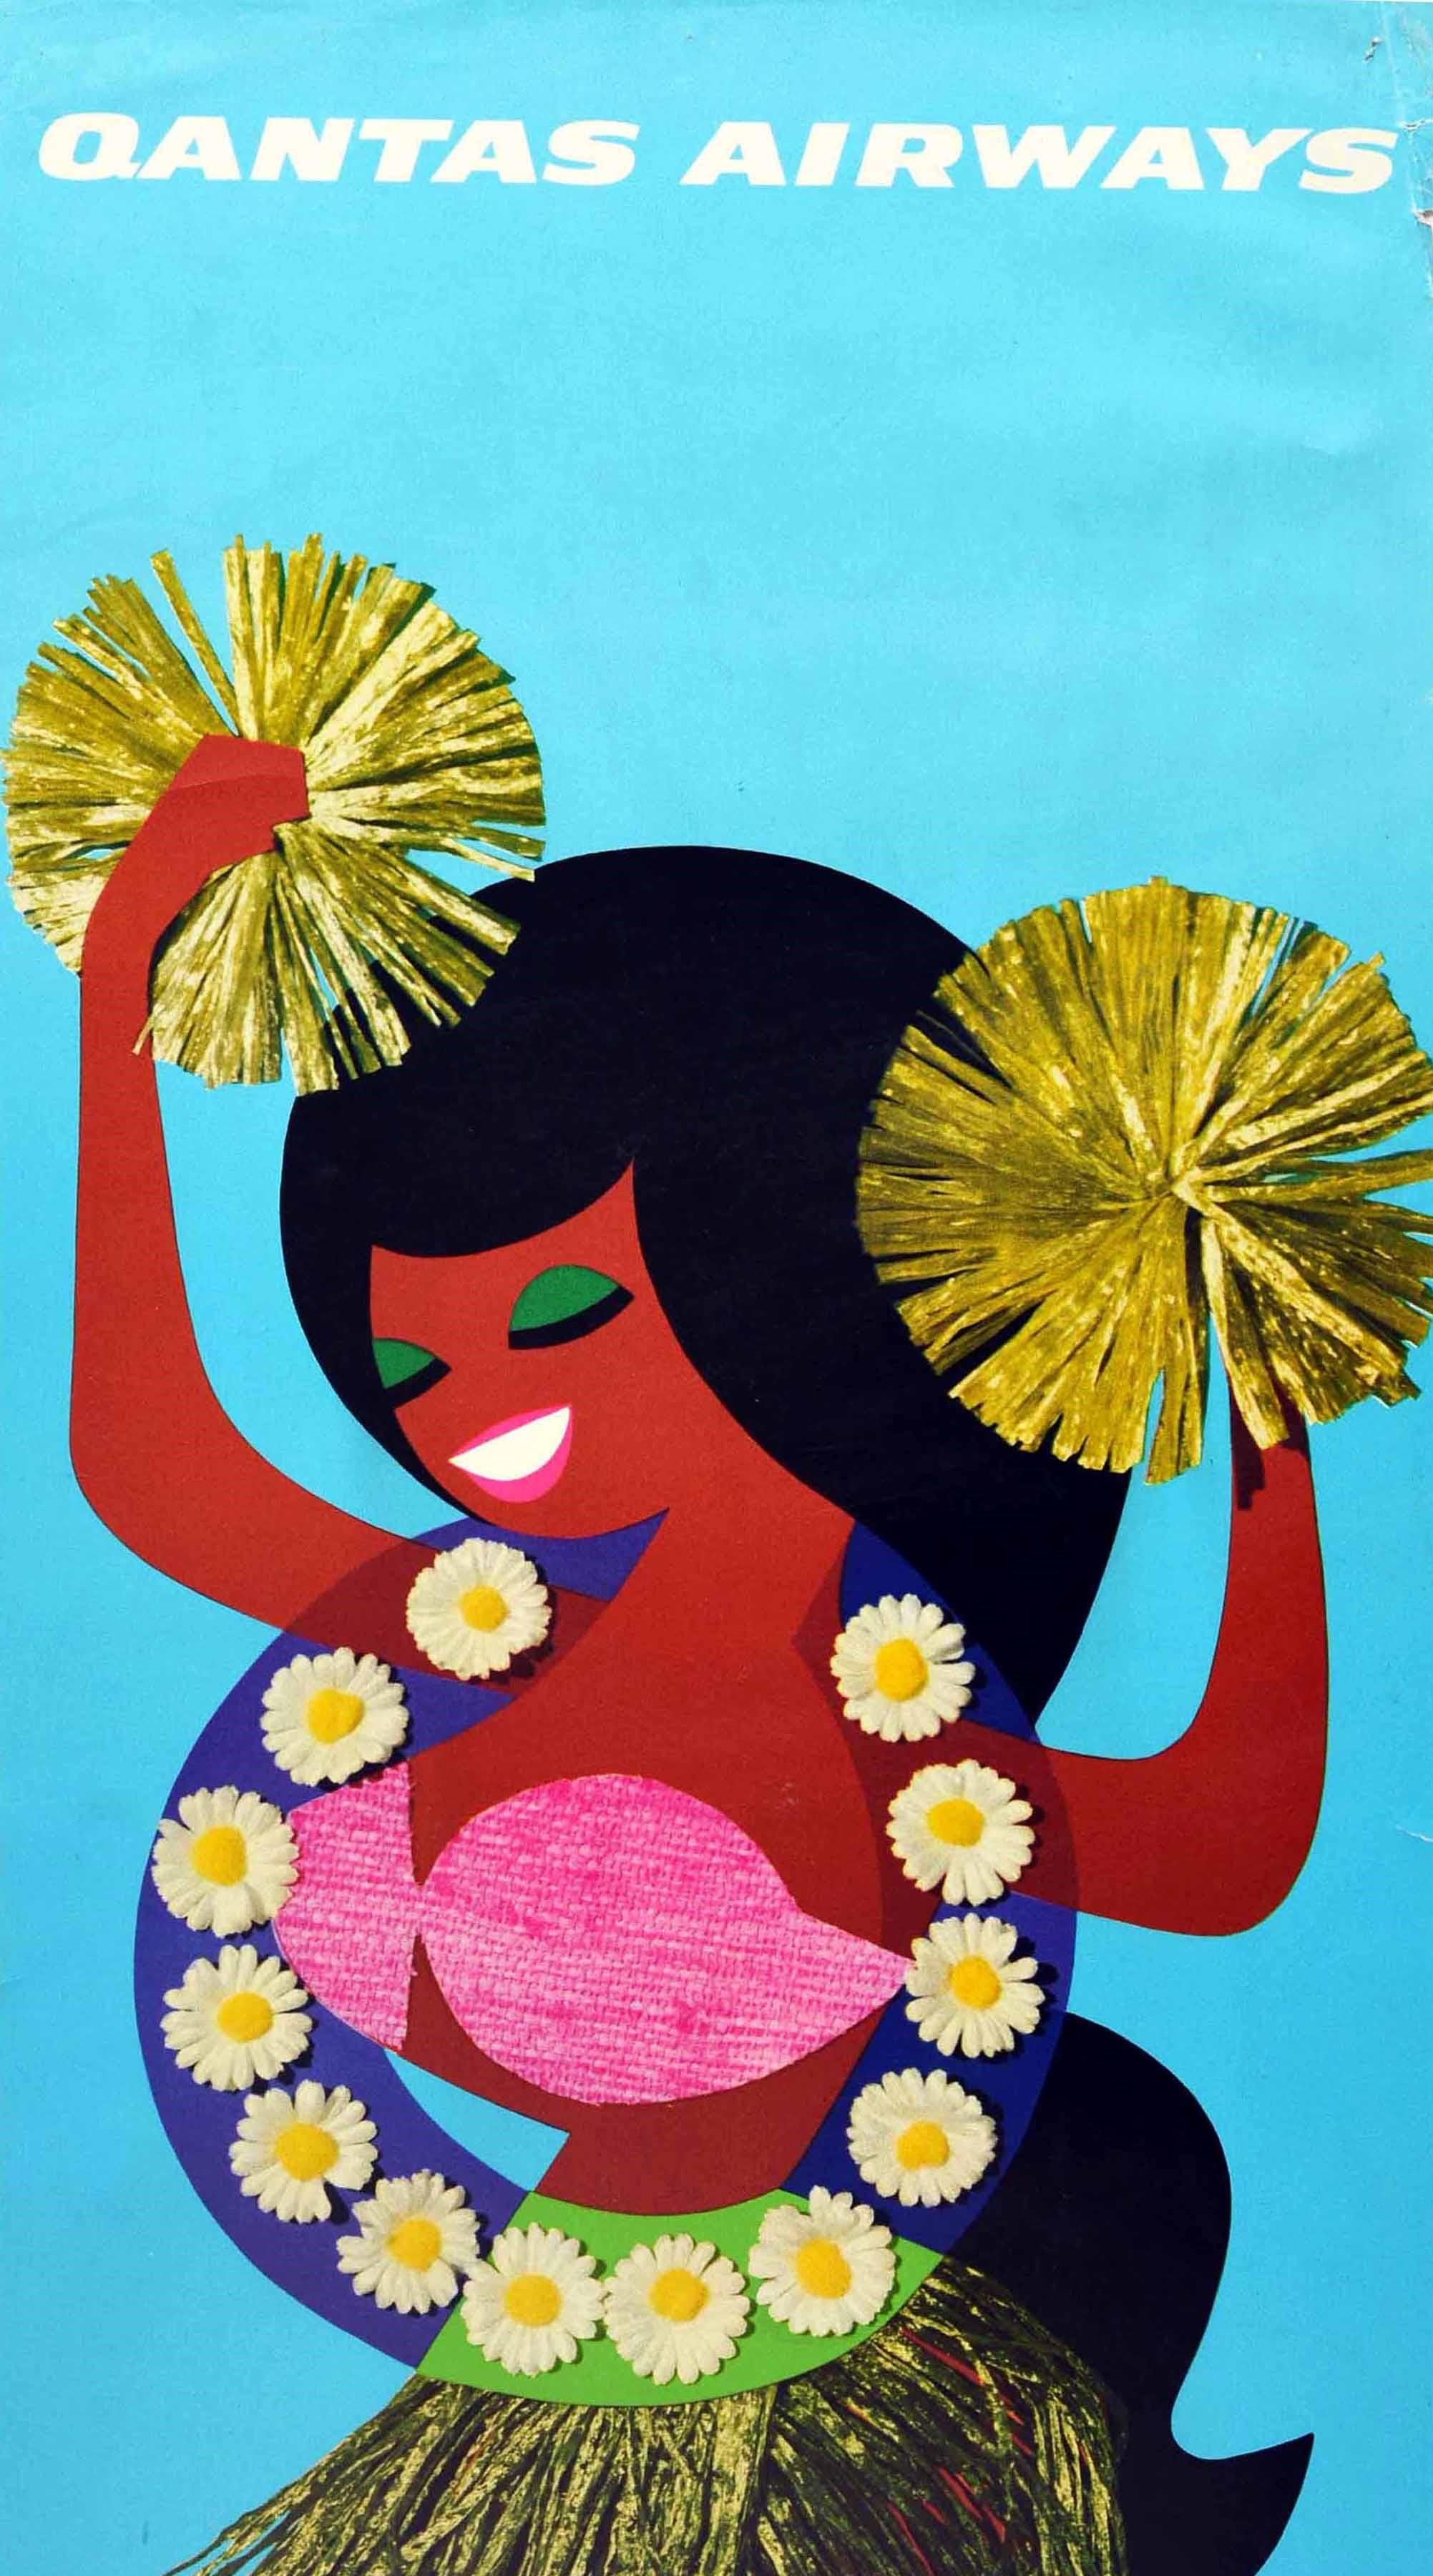 Original vintage travel poster - Qantas Airways South Pacific - featuring a colourful collage style design showing a smiling lady with long black hair wearing green eyeshadow with a traditional grass skirt and a pink bikini top, an image of daisy